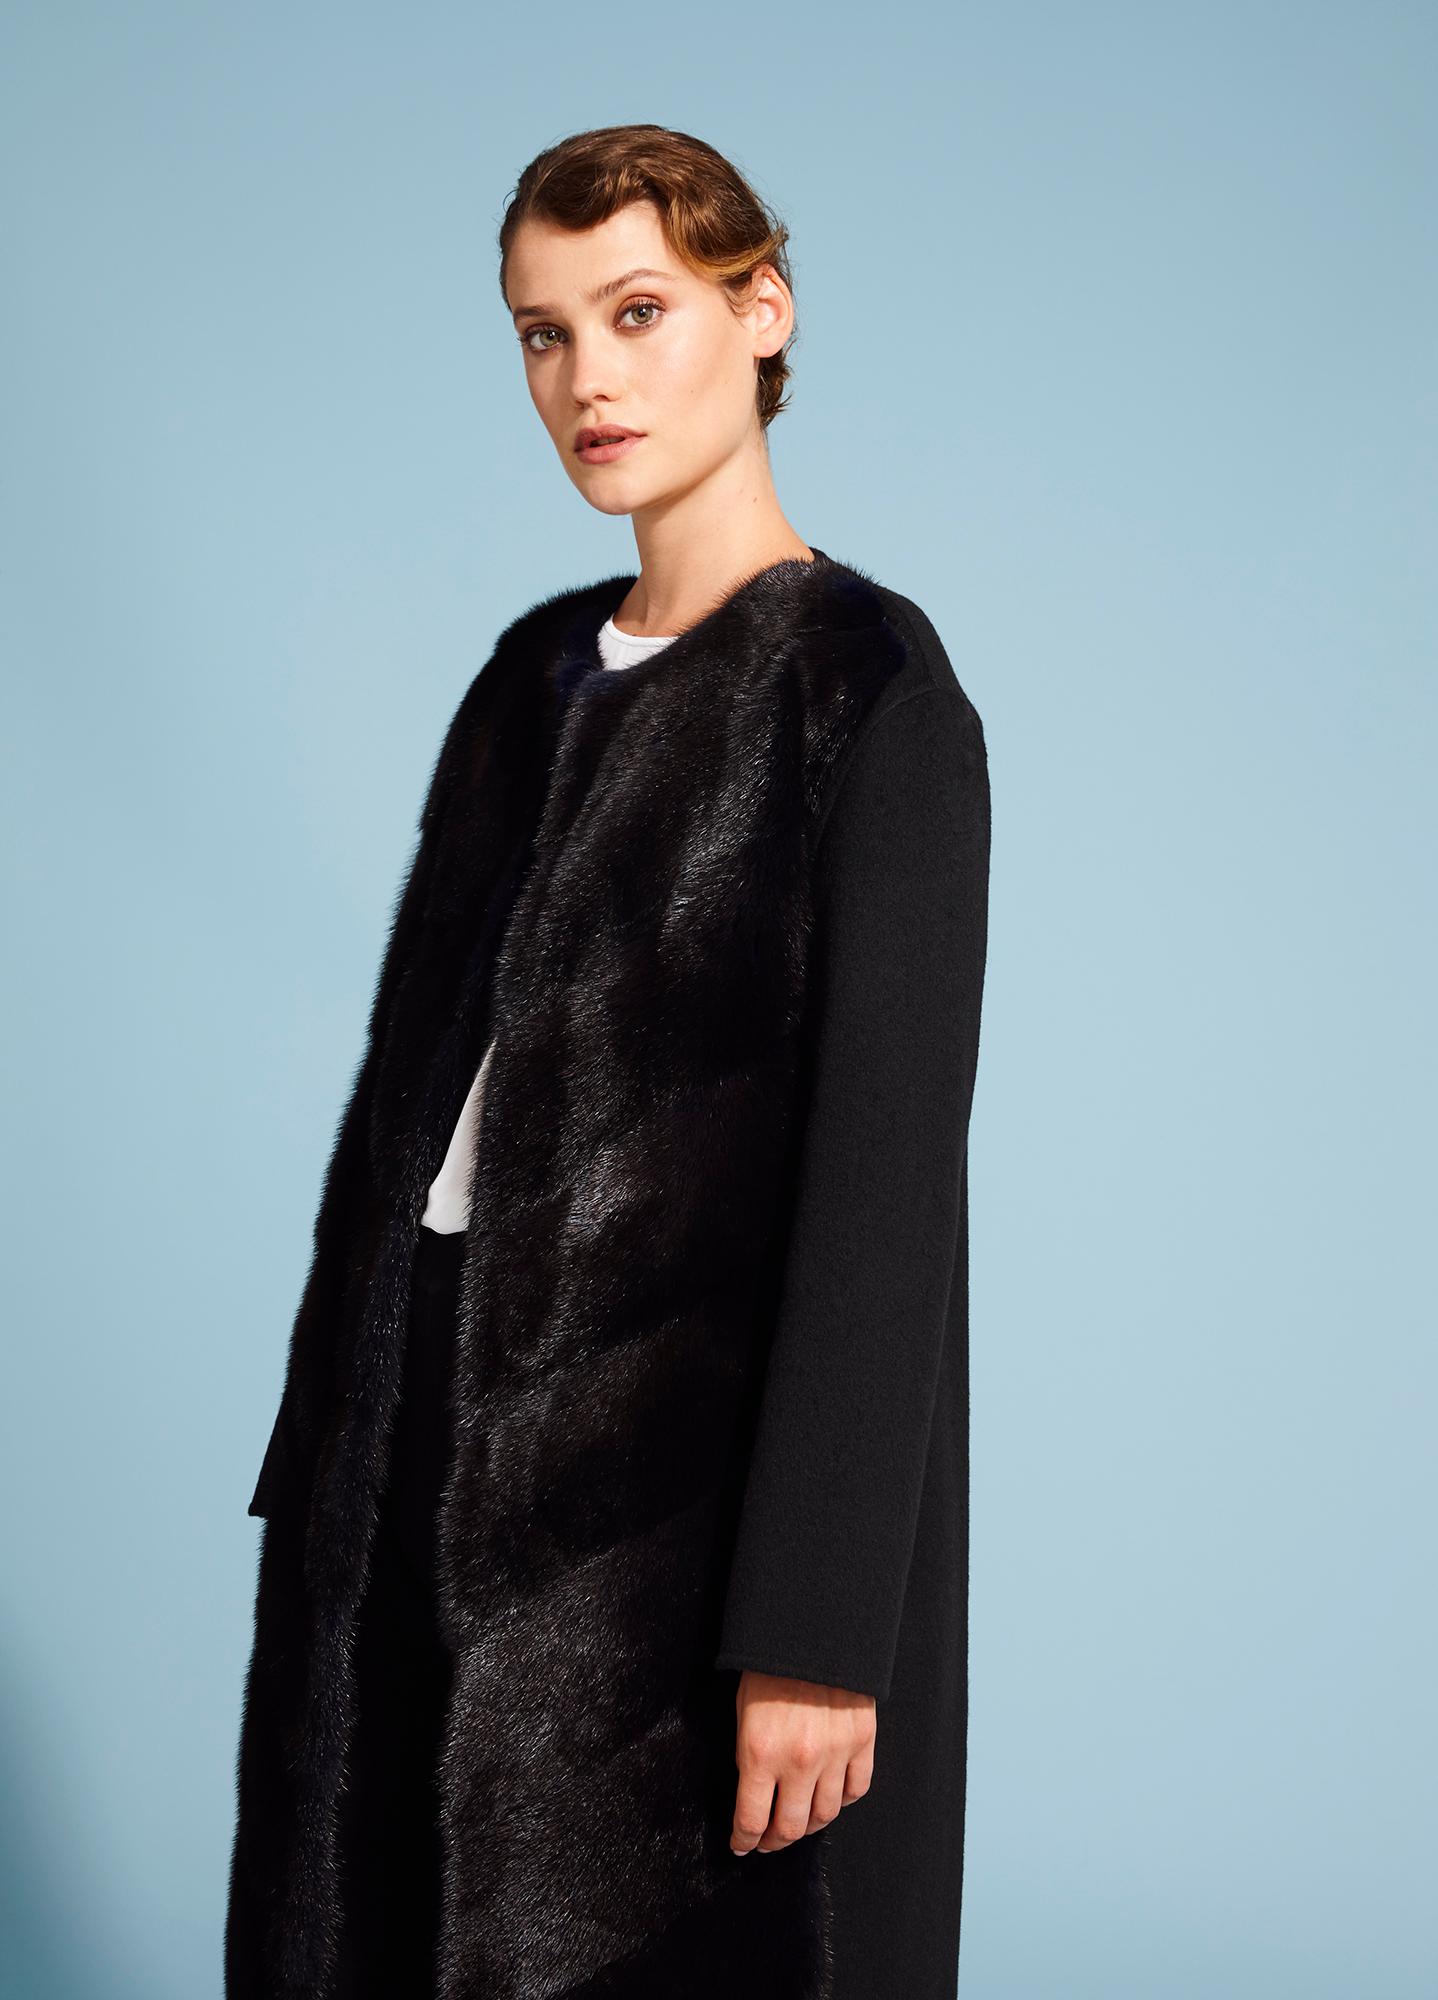 The Collarless Coat is Verheyen London’s wardrobe classic “must have” for every woman.

The tailored statement coat will take you from day to evening in any look or style.

PRODUCT DETAILS

Collarless Coat

Available in 6 weeks


Colour: Navy